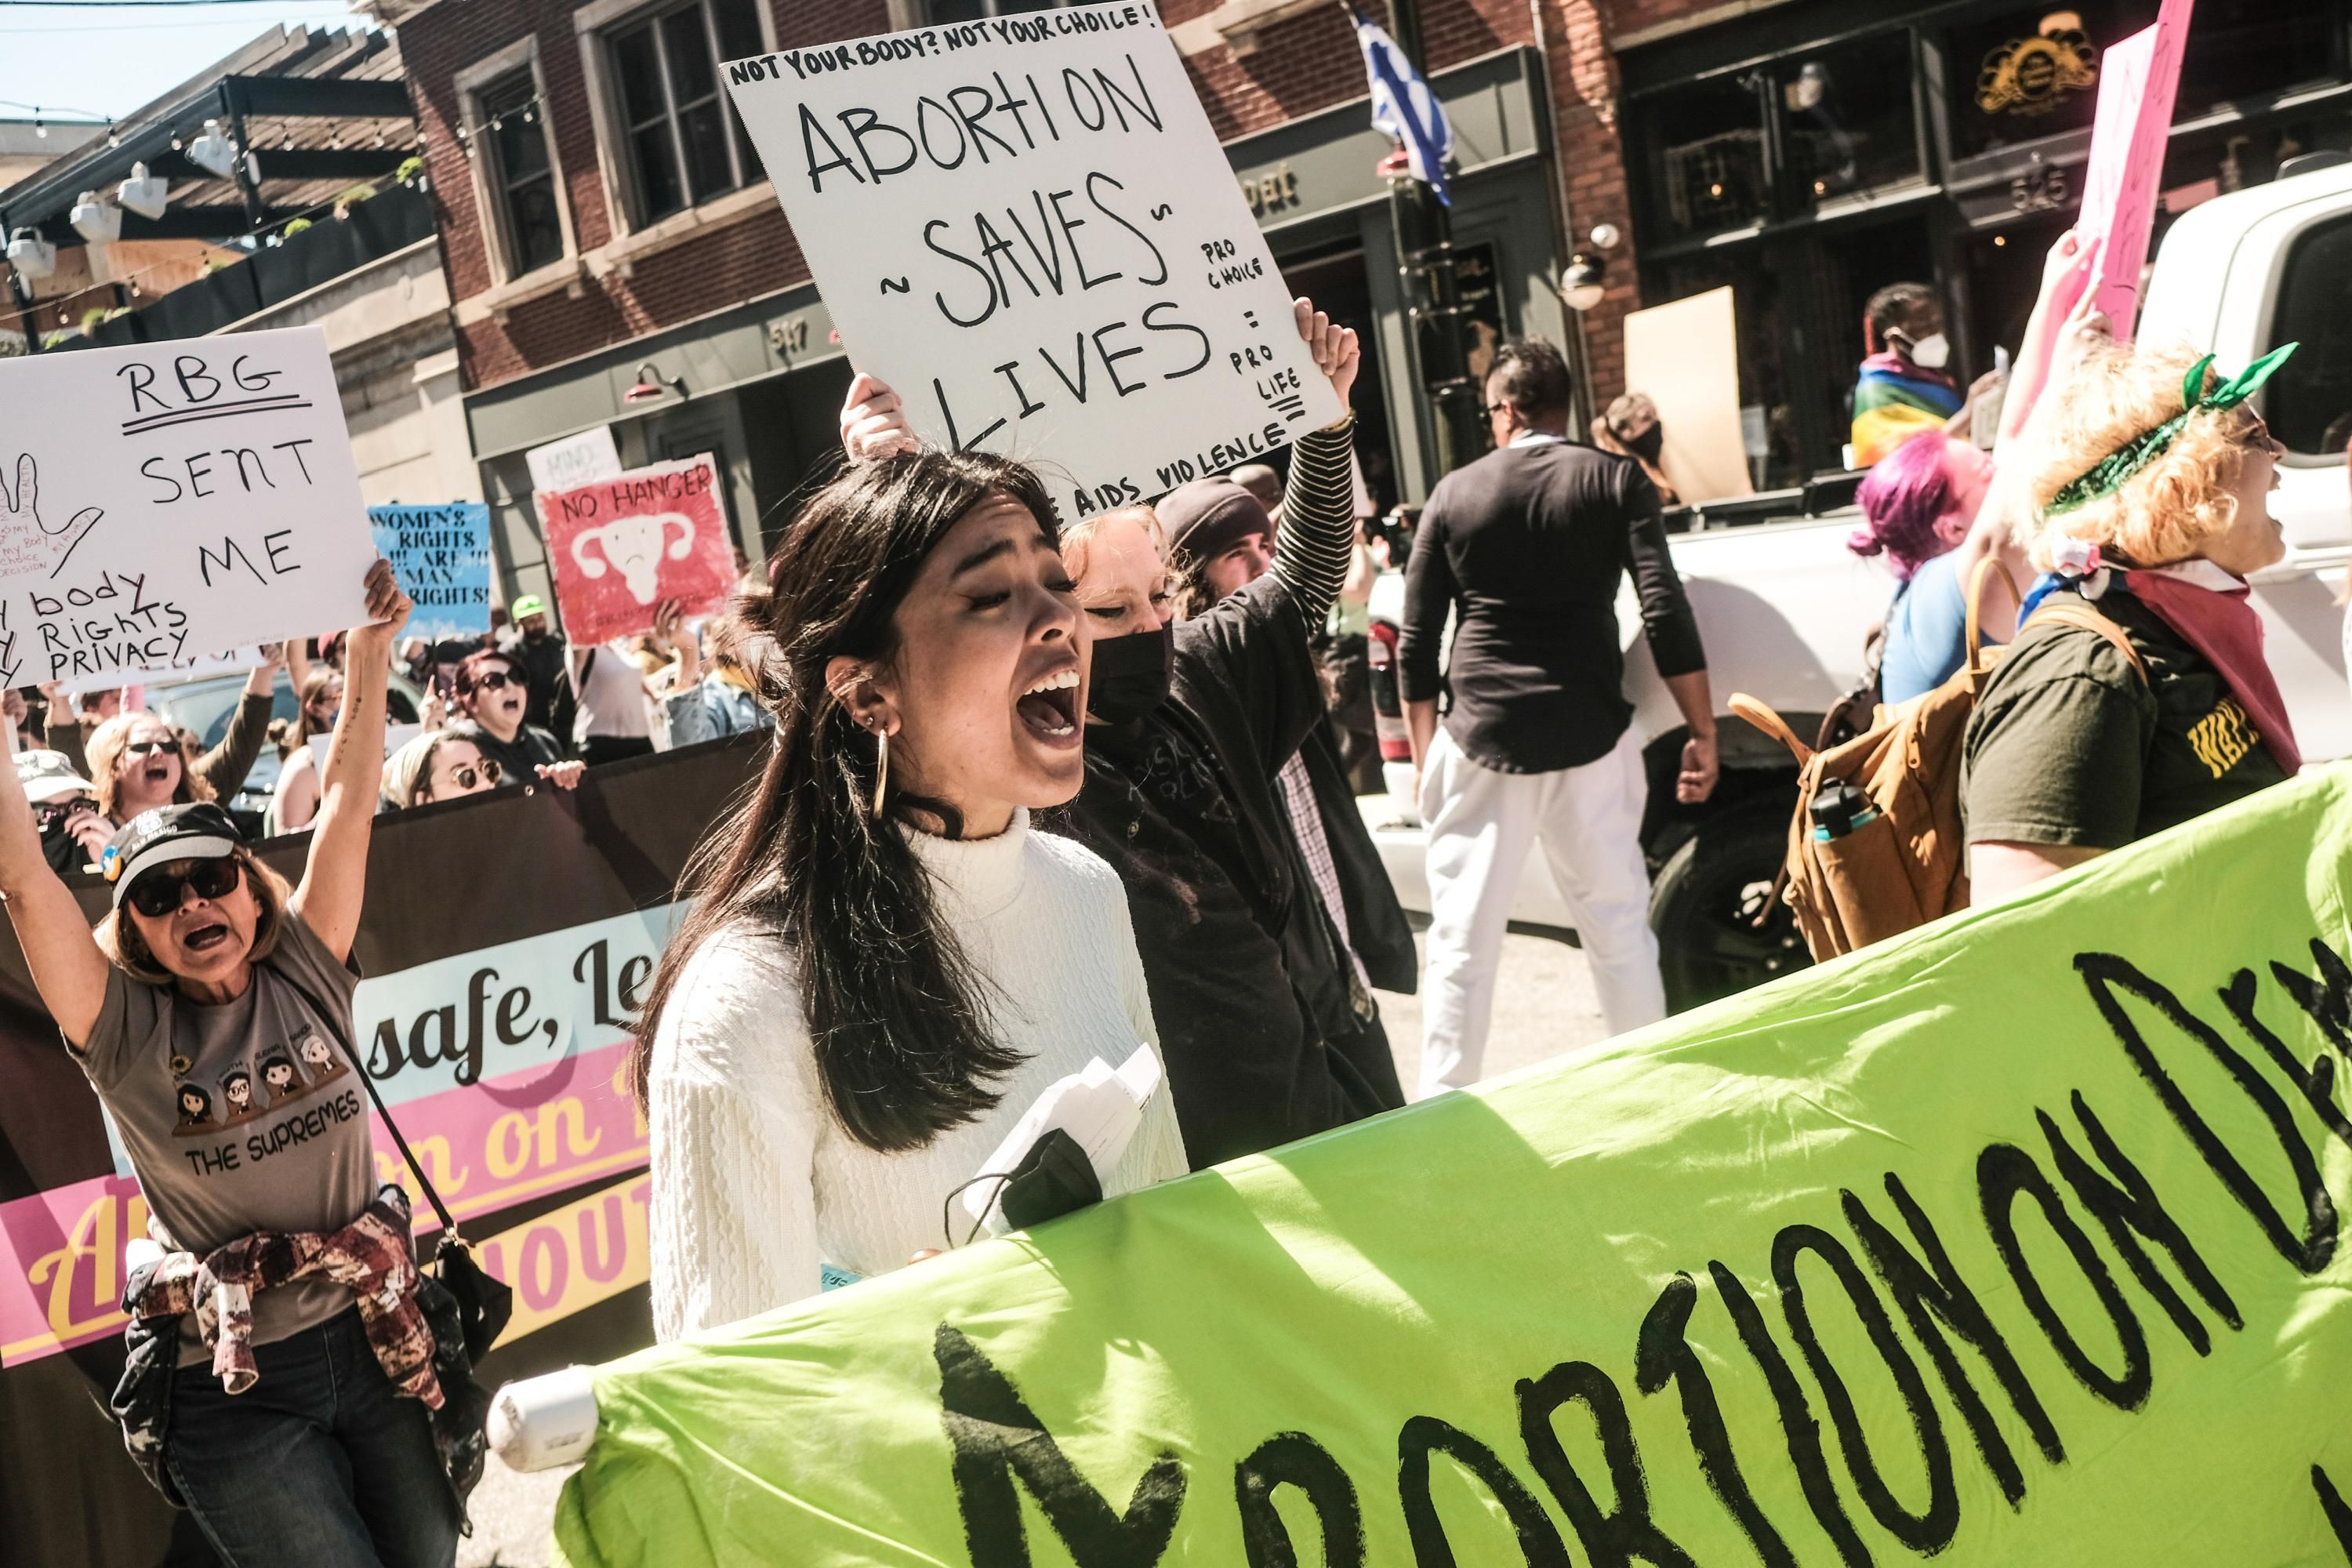 Demonstrators march for abortion rights in Detroit, Michigan.